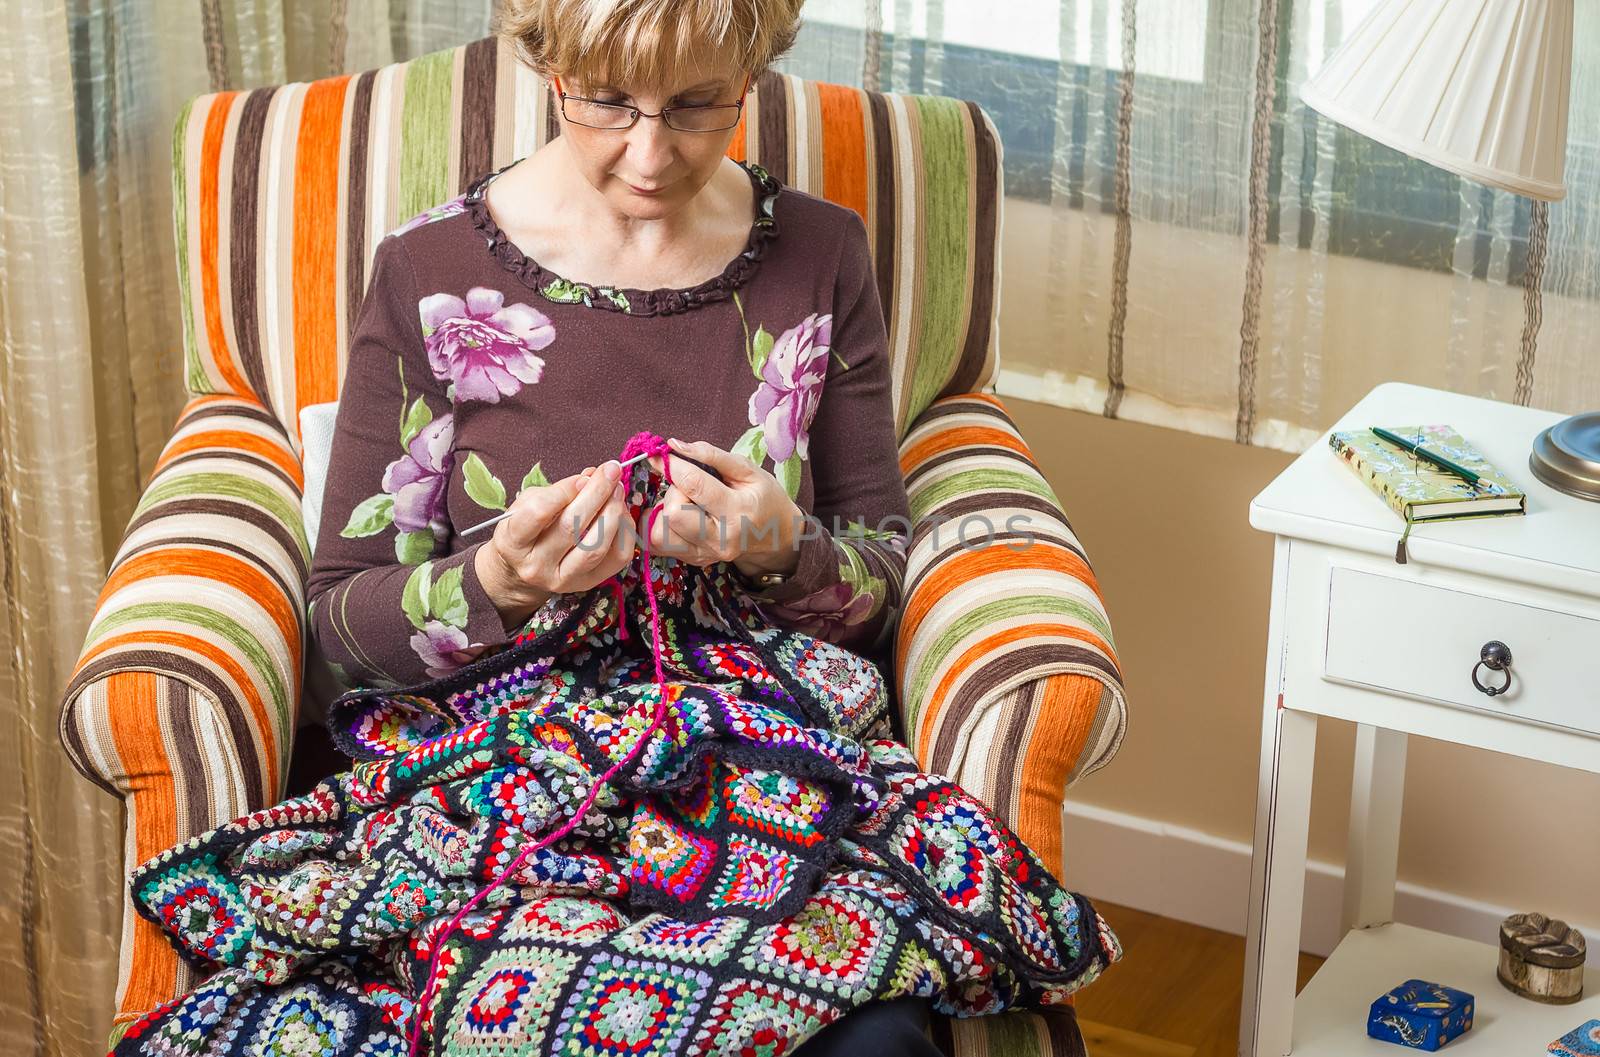 Portrait of senior woman knitting a vintage wool quilt with colorful patches